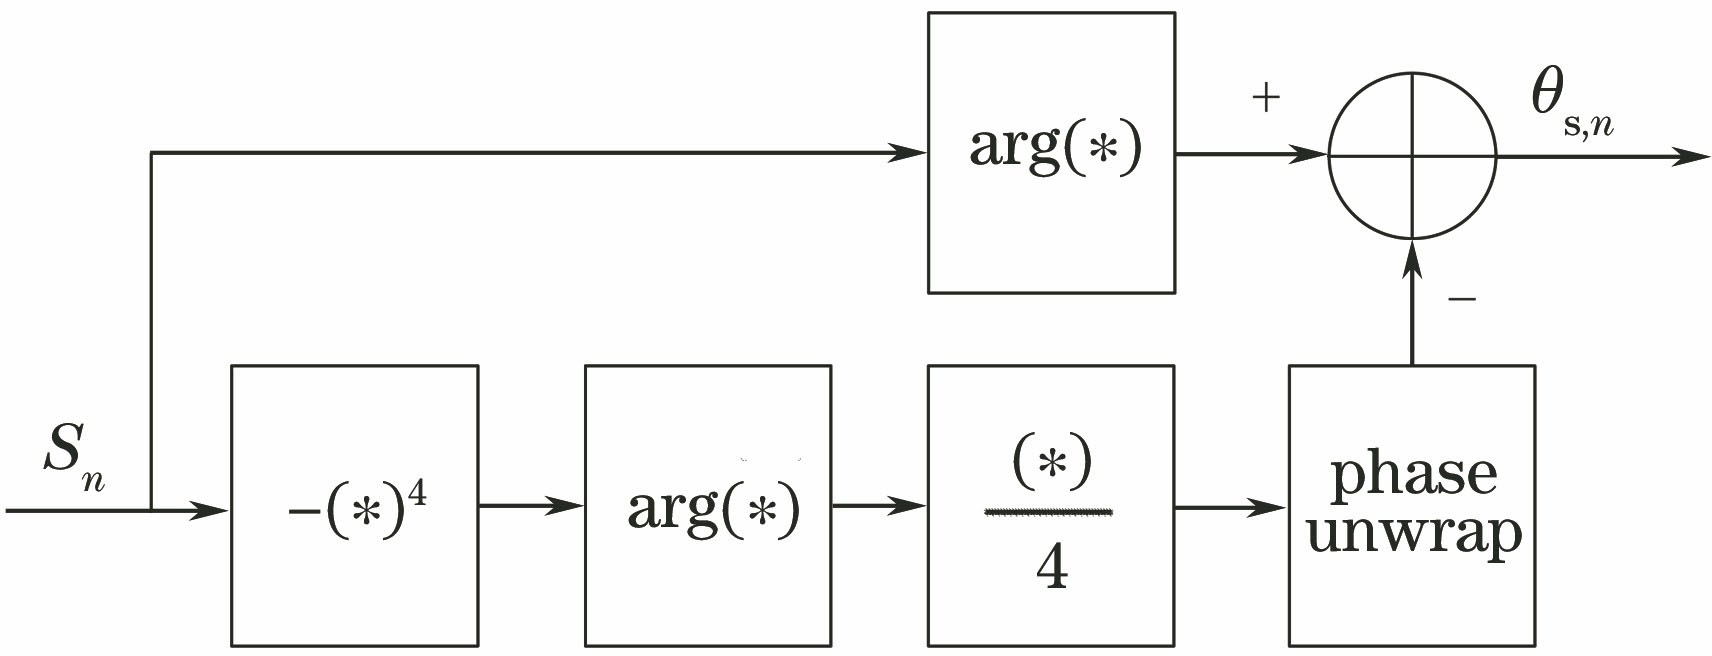 Flow chart of proposed algorithm